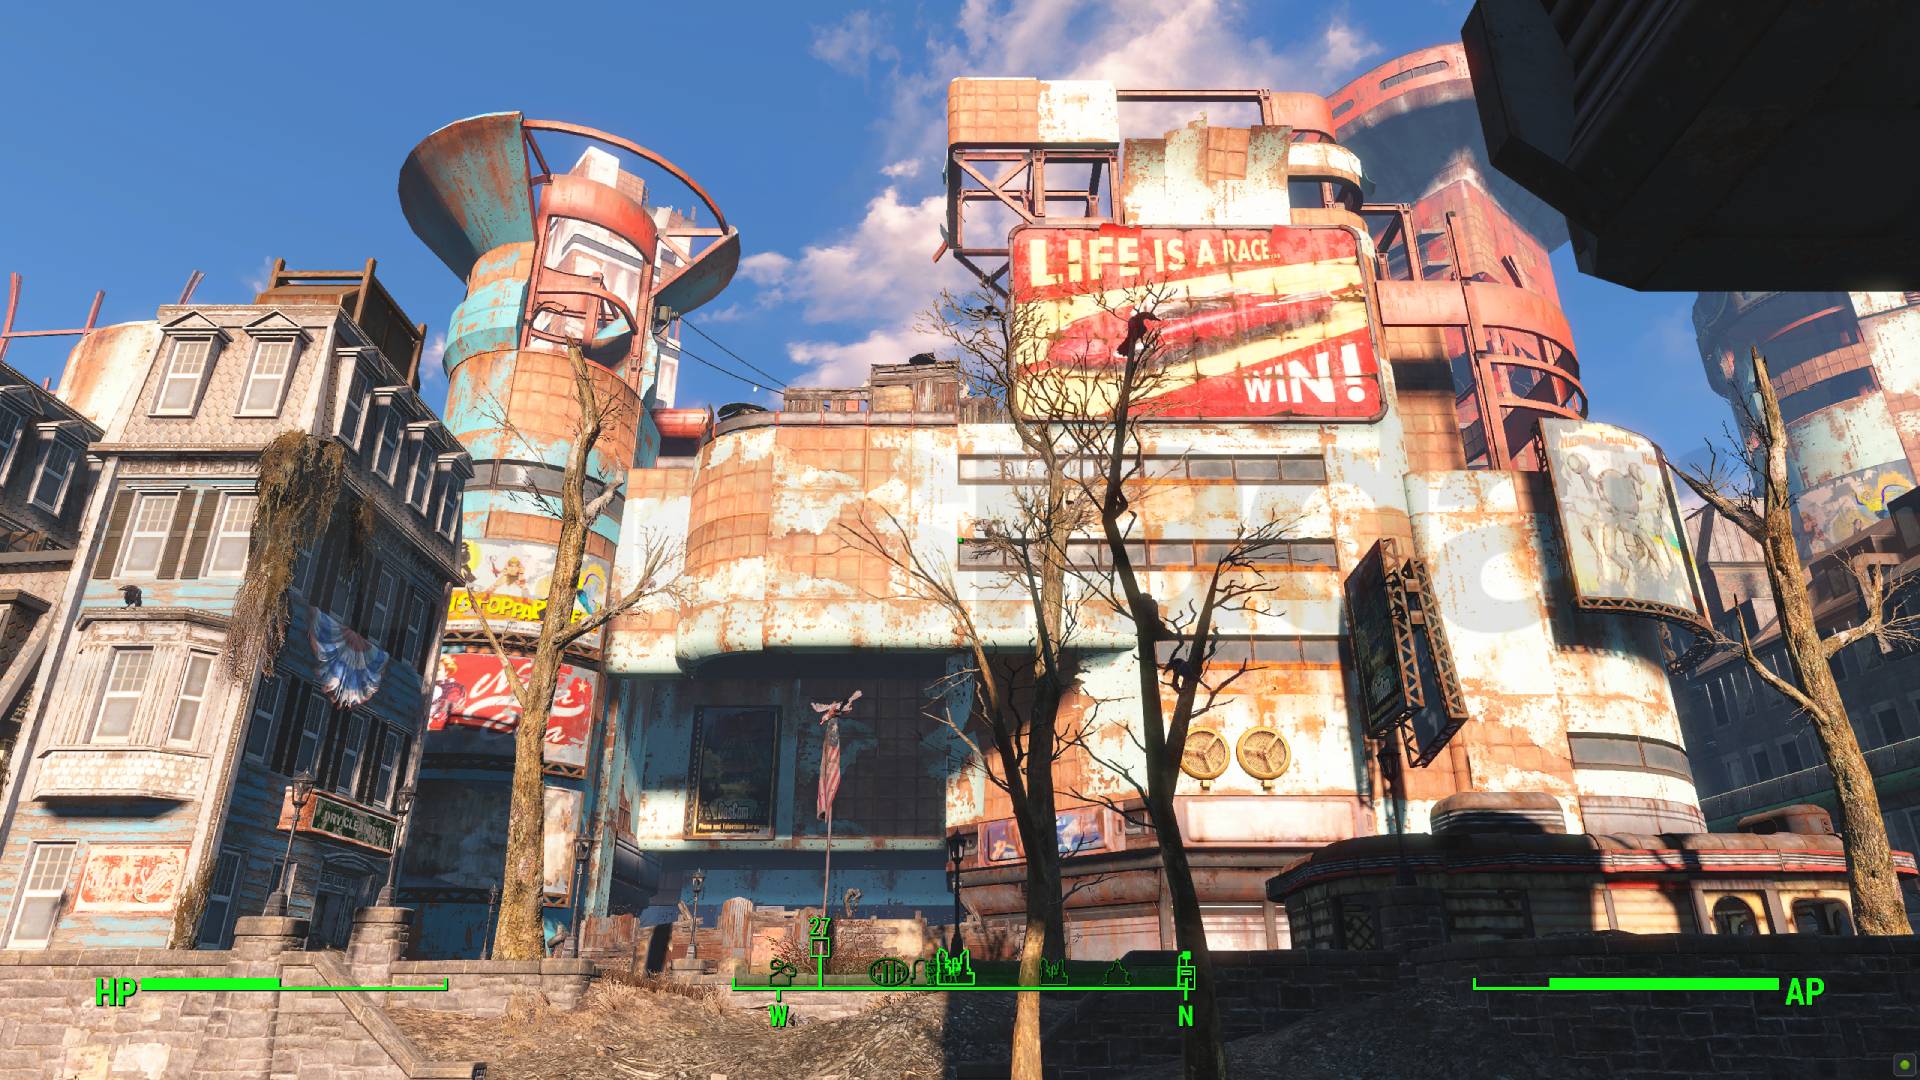 How to fix the Fallout 4 Mysterious Signal bug